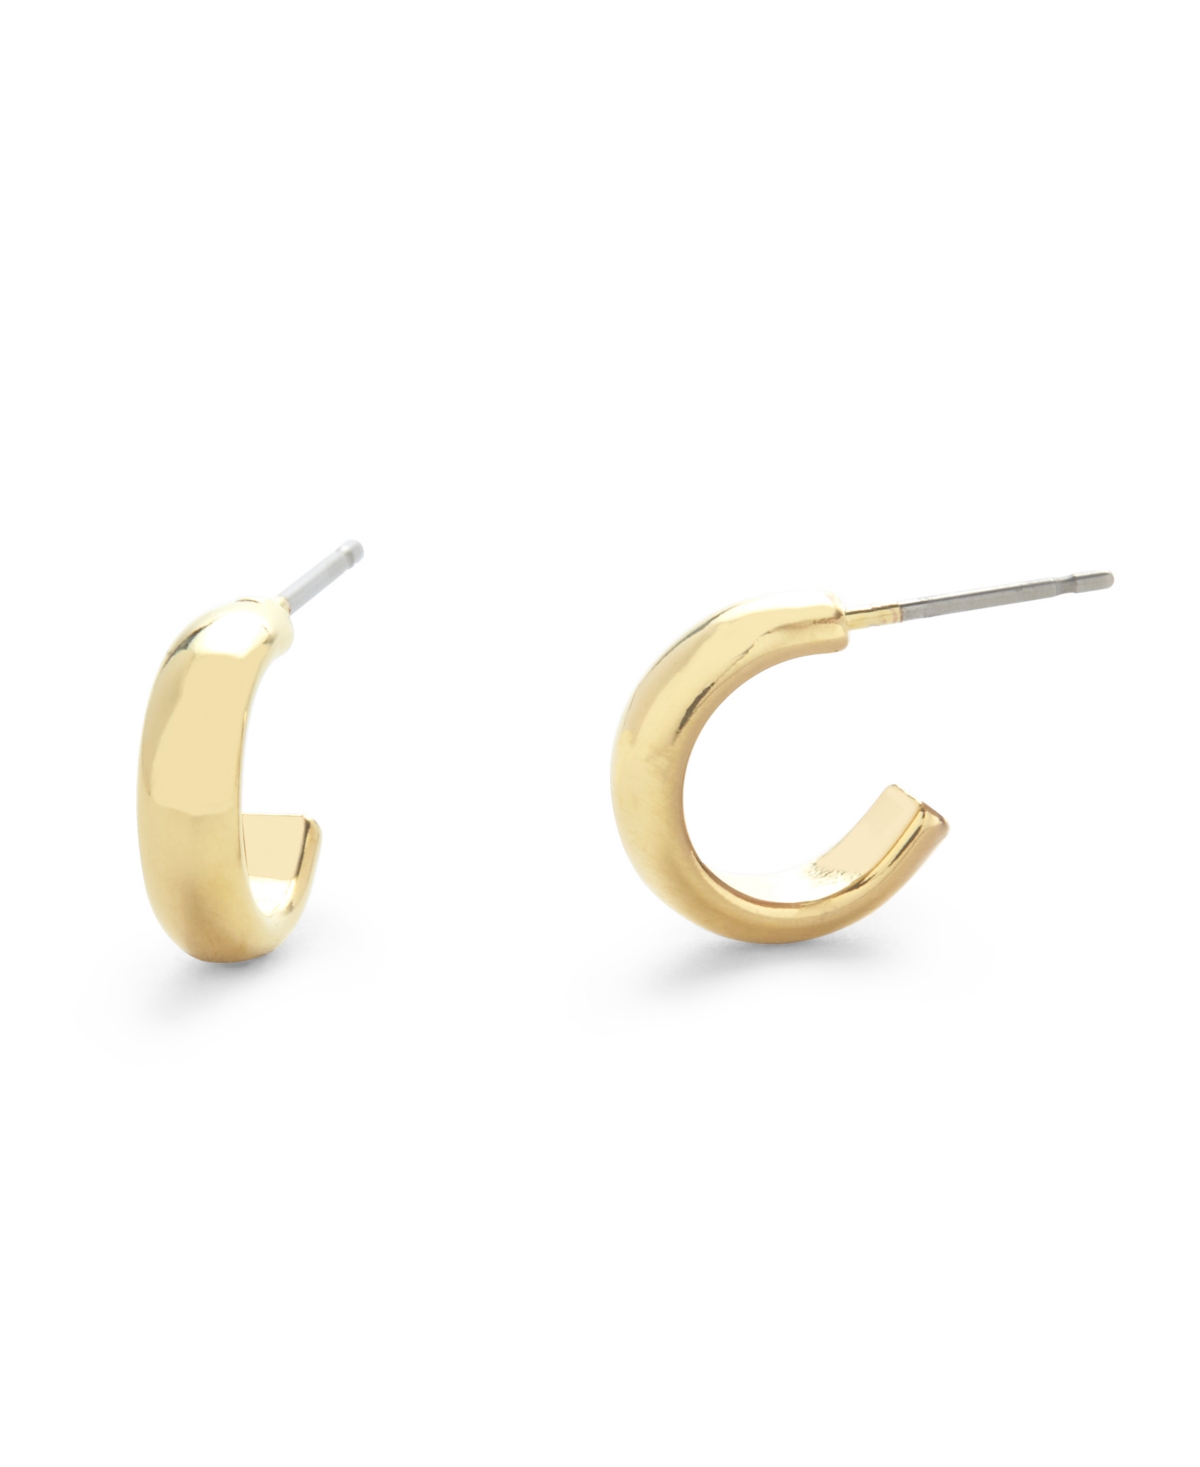 14K Gold Plated Darby Huggies Earrings - Gold Plated